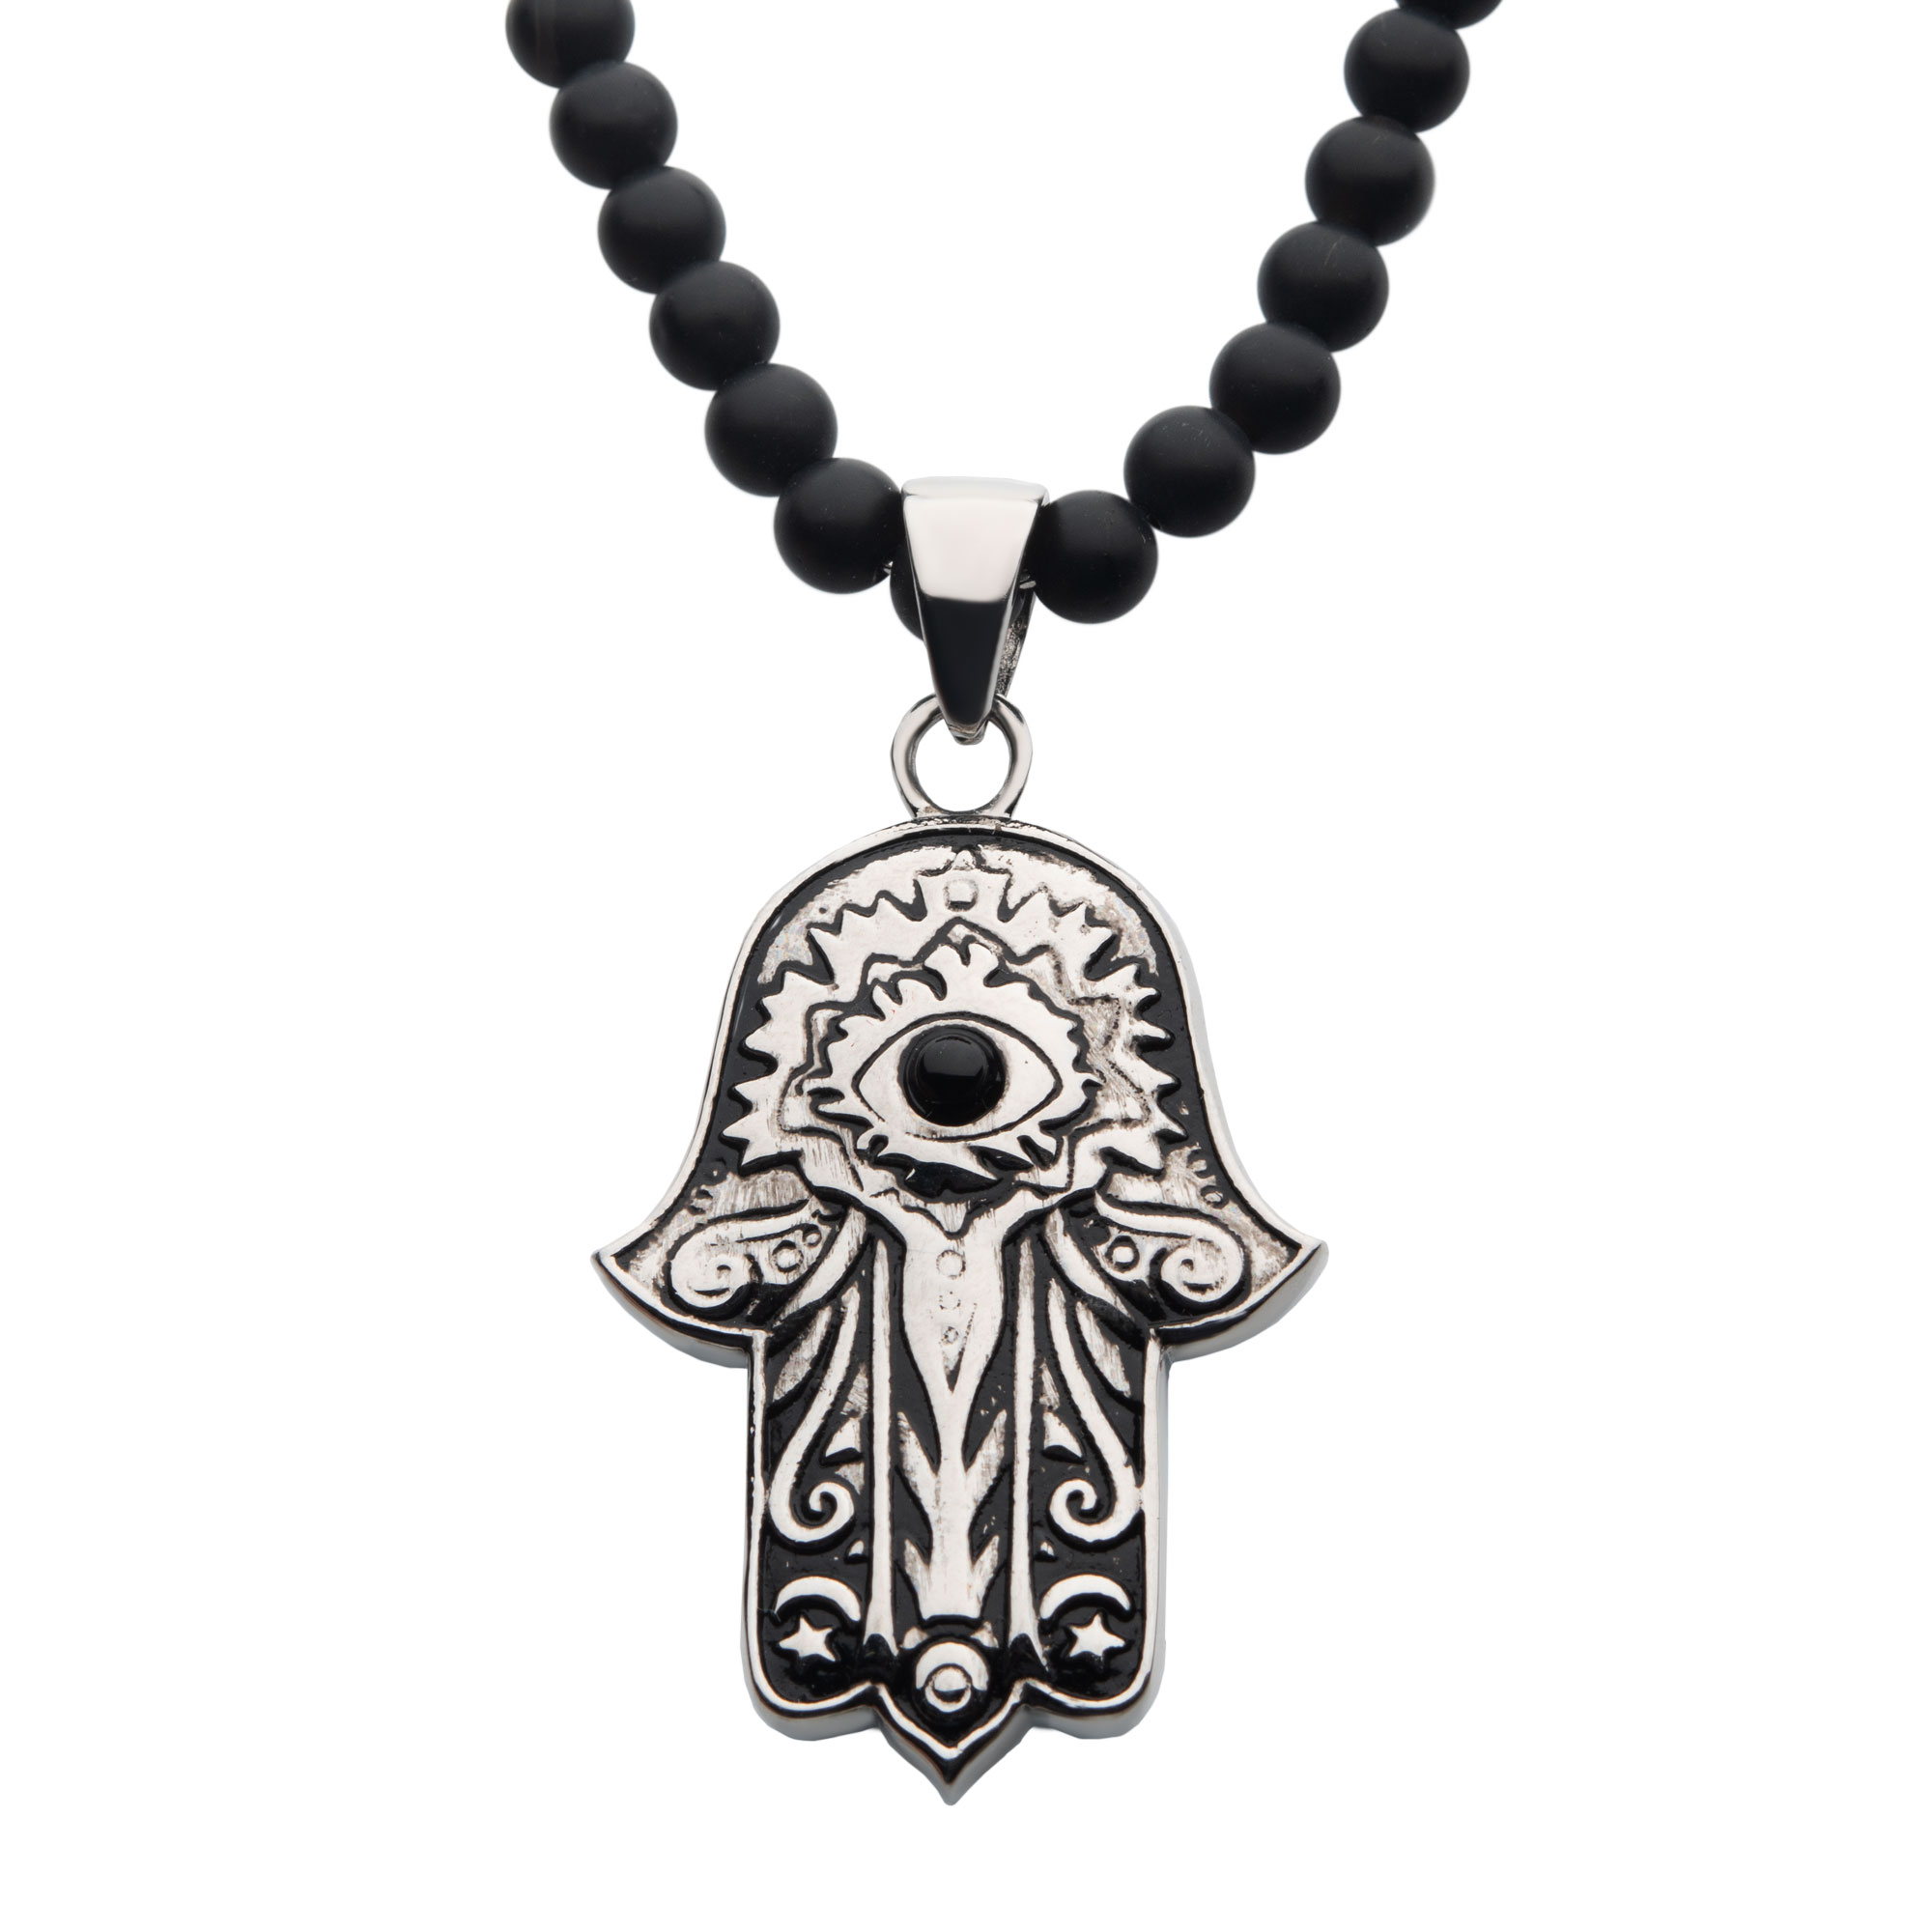 Stainless Steel with Centerpiece Black Agate Stone Hamsa Pendant, with Black Agate Stone Bead Necklace Jayson Jewelers Cape Girardeau, MO